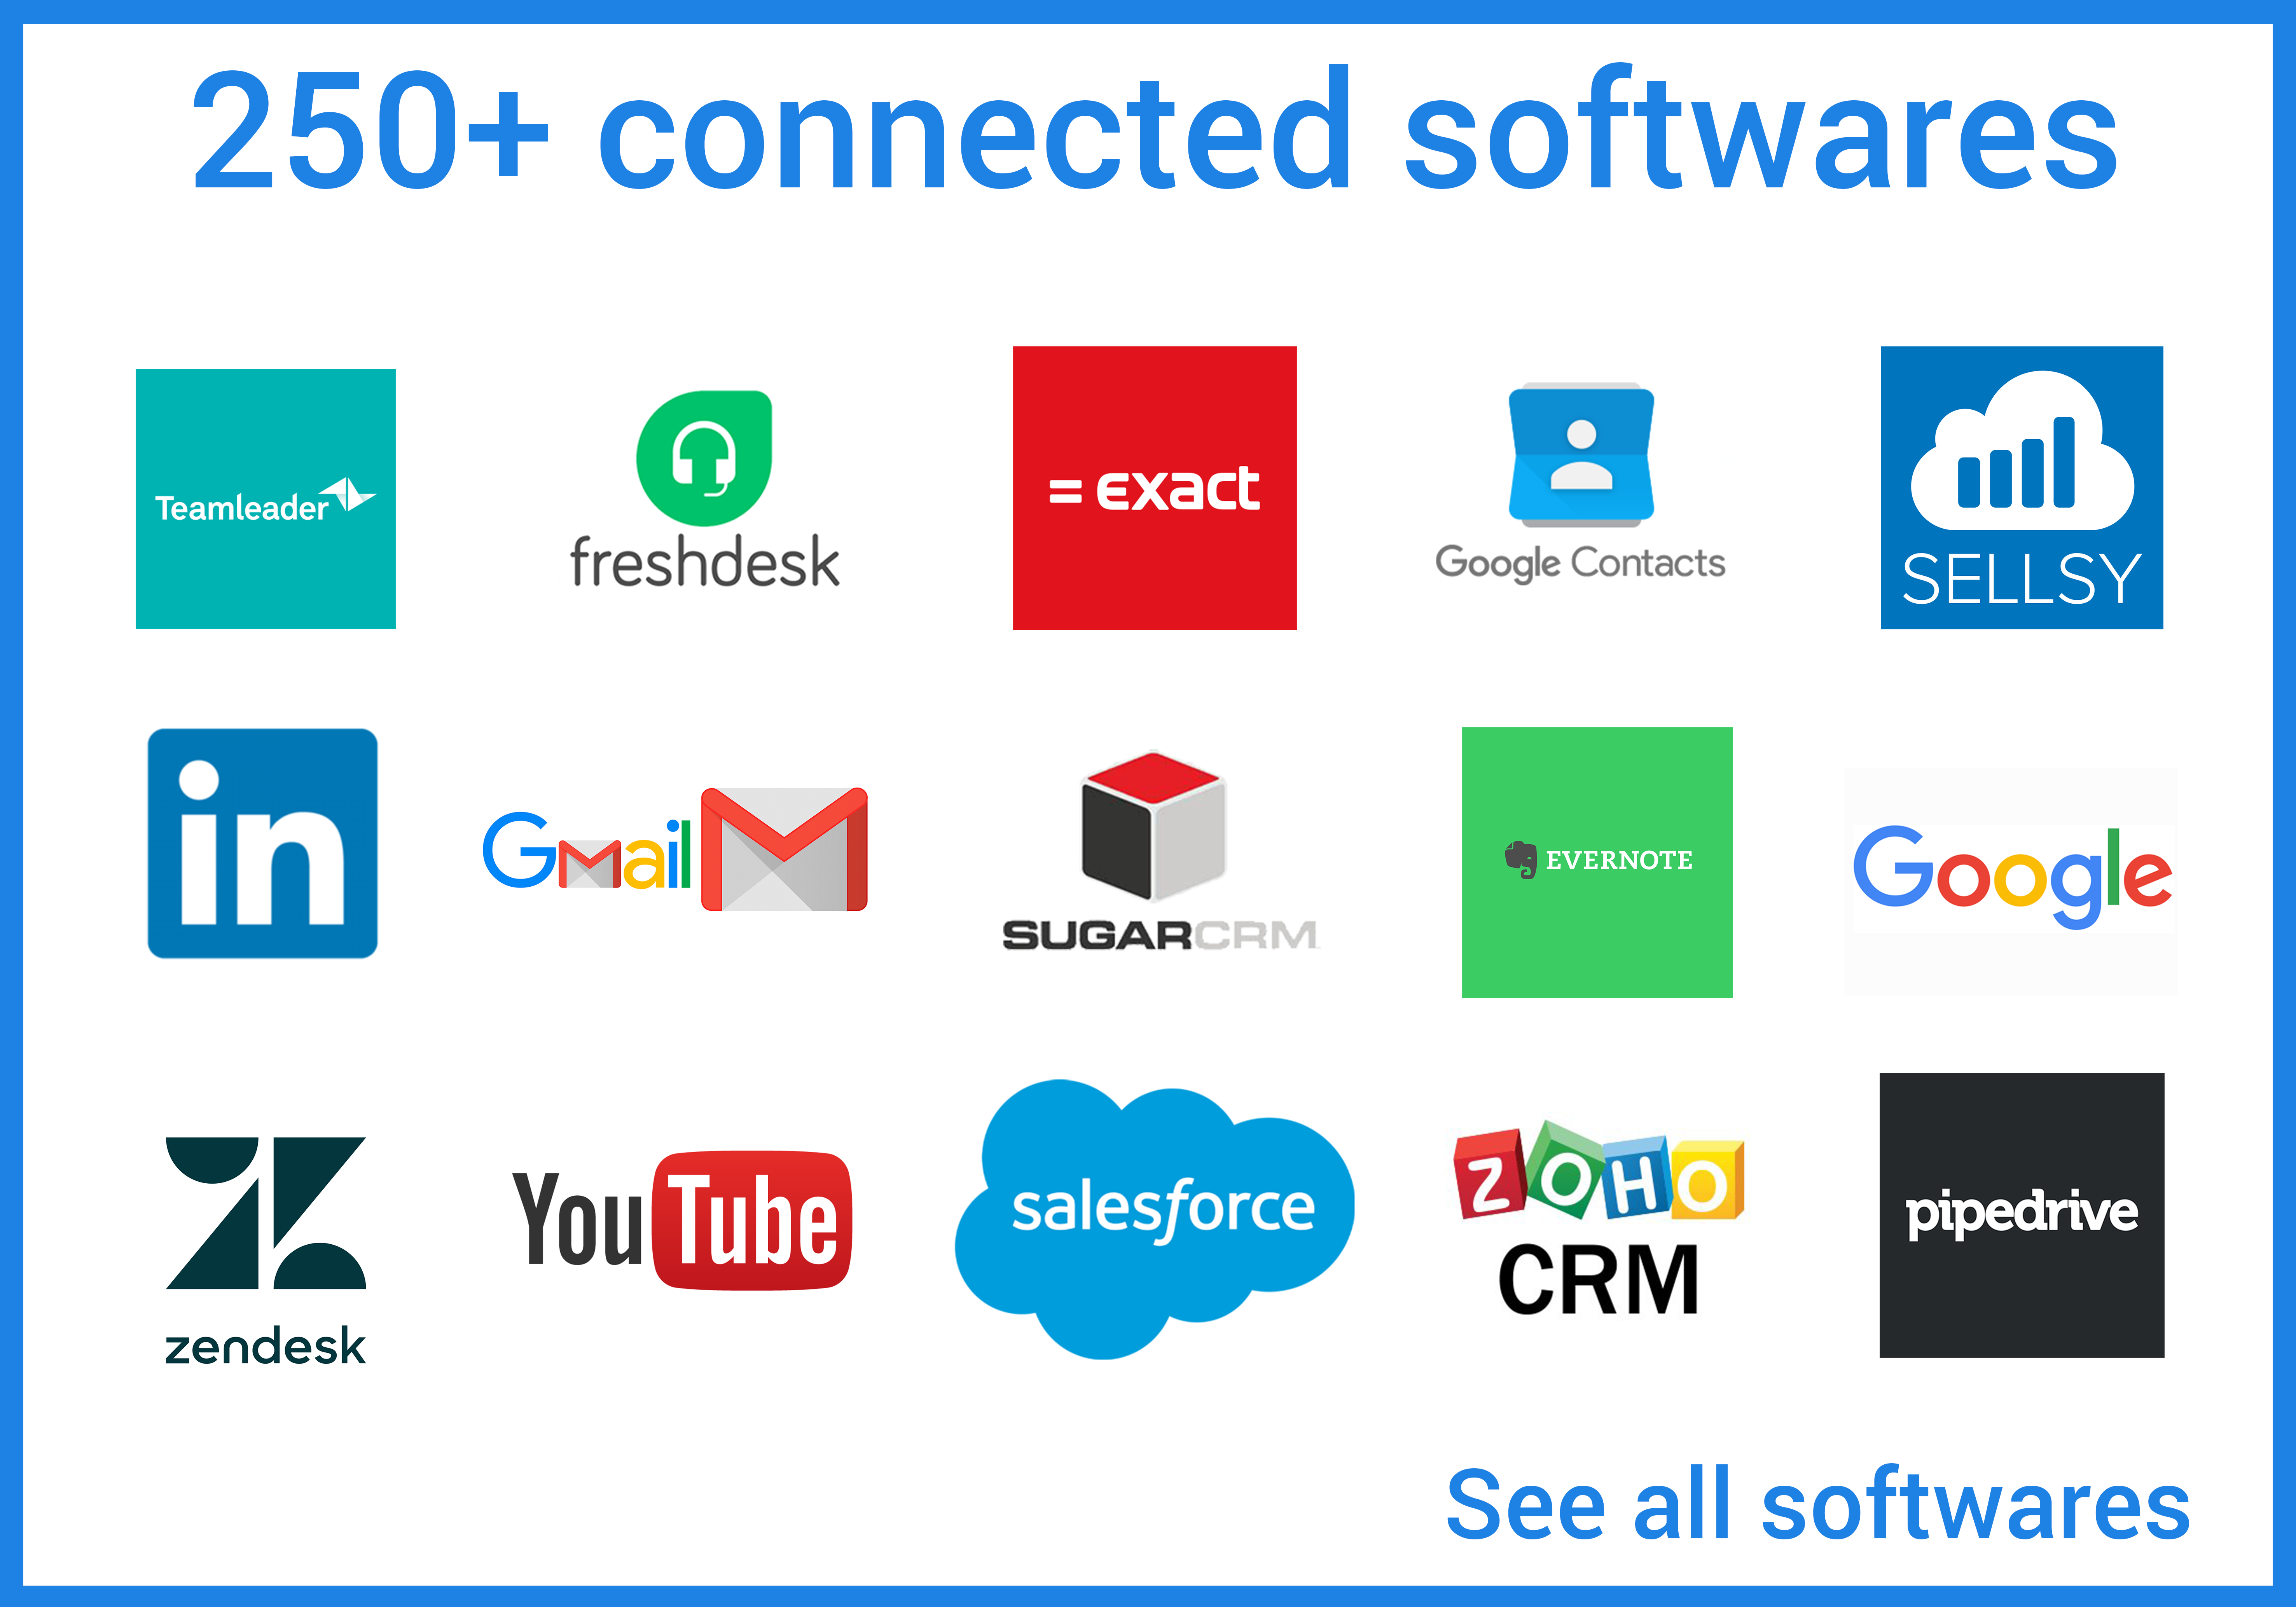 All connected softwares_ALLOcloud